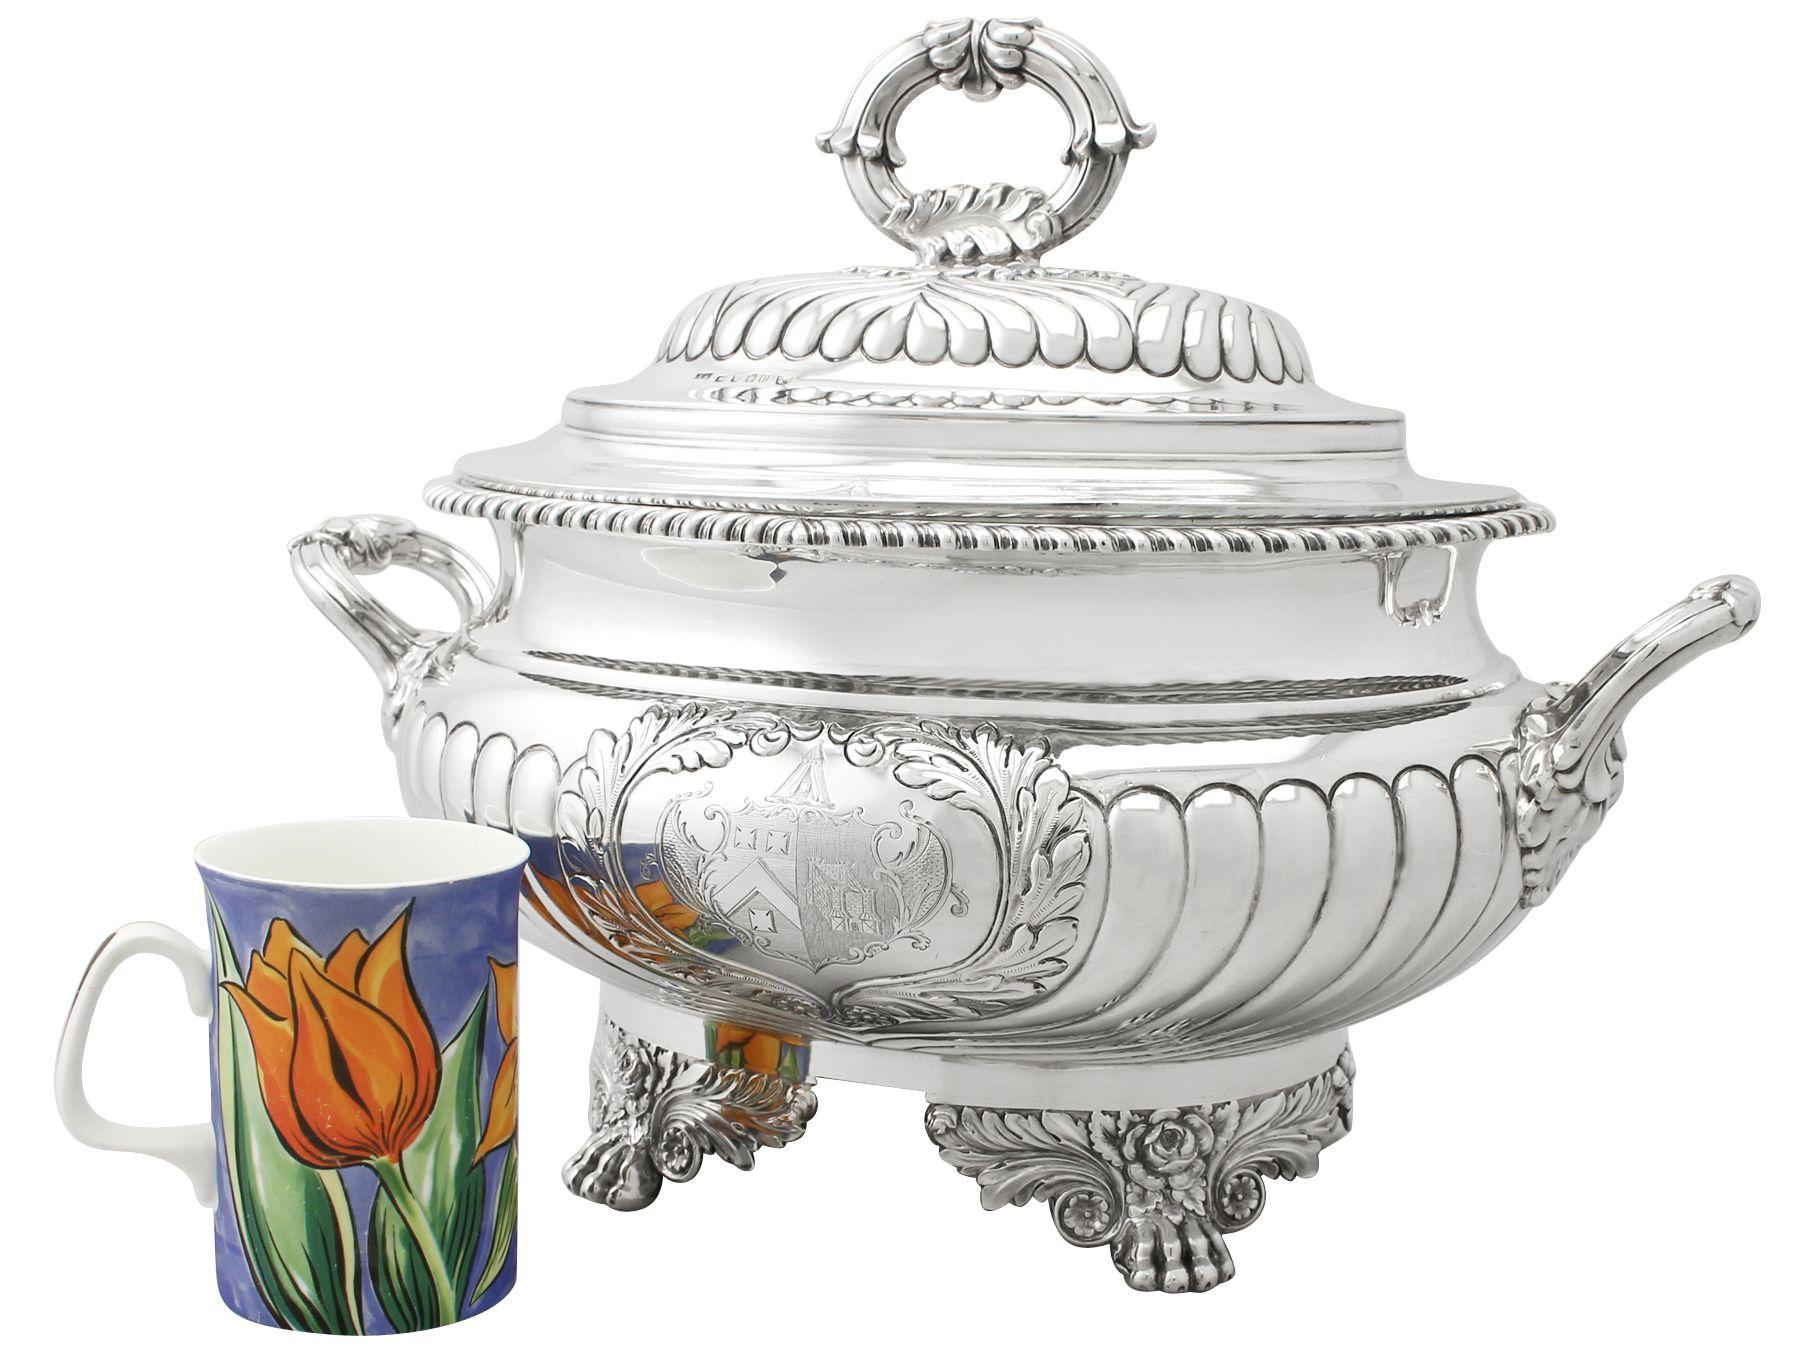 A magnificent, fine and impressive, rare antique George IV English sterling silver soup tureen assayed in York; an addition to our dining silverware collection.

This magnificent antique George IV English sterling silver soup tureen has an oval